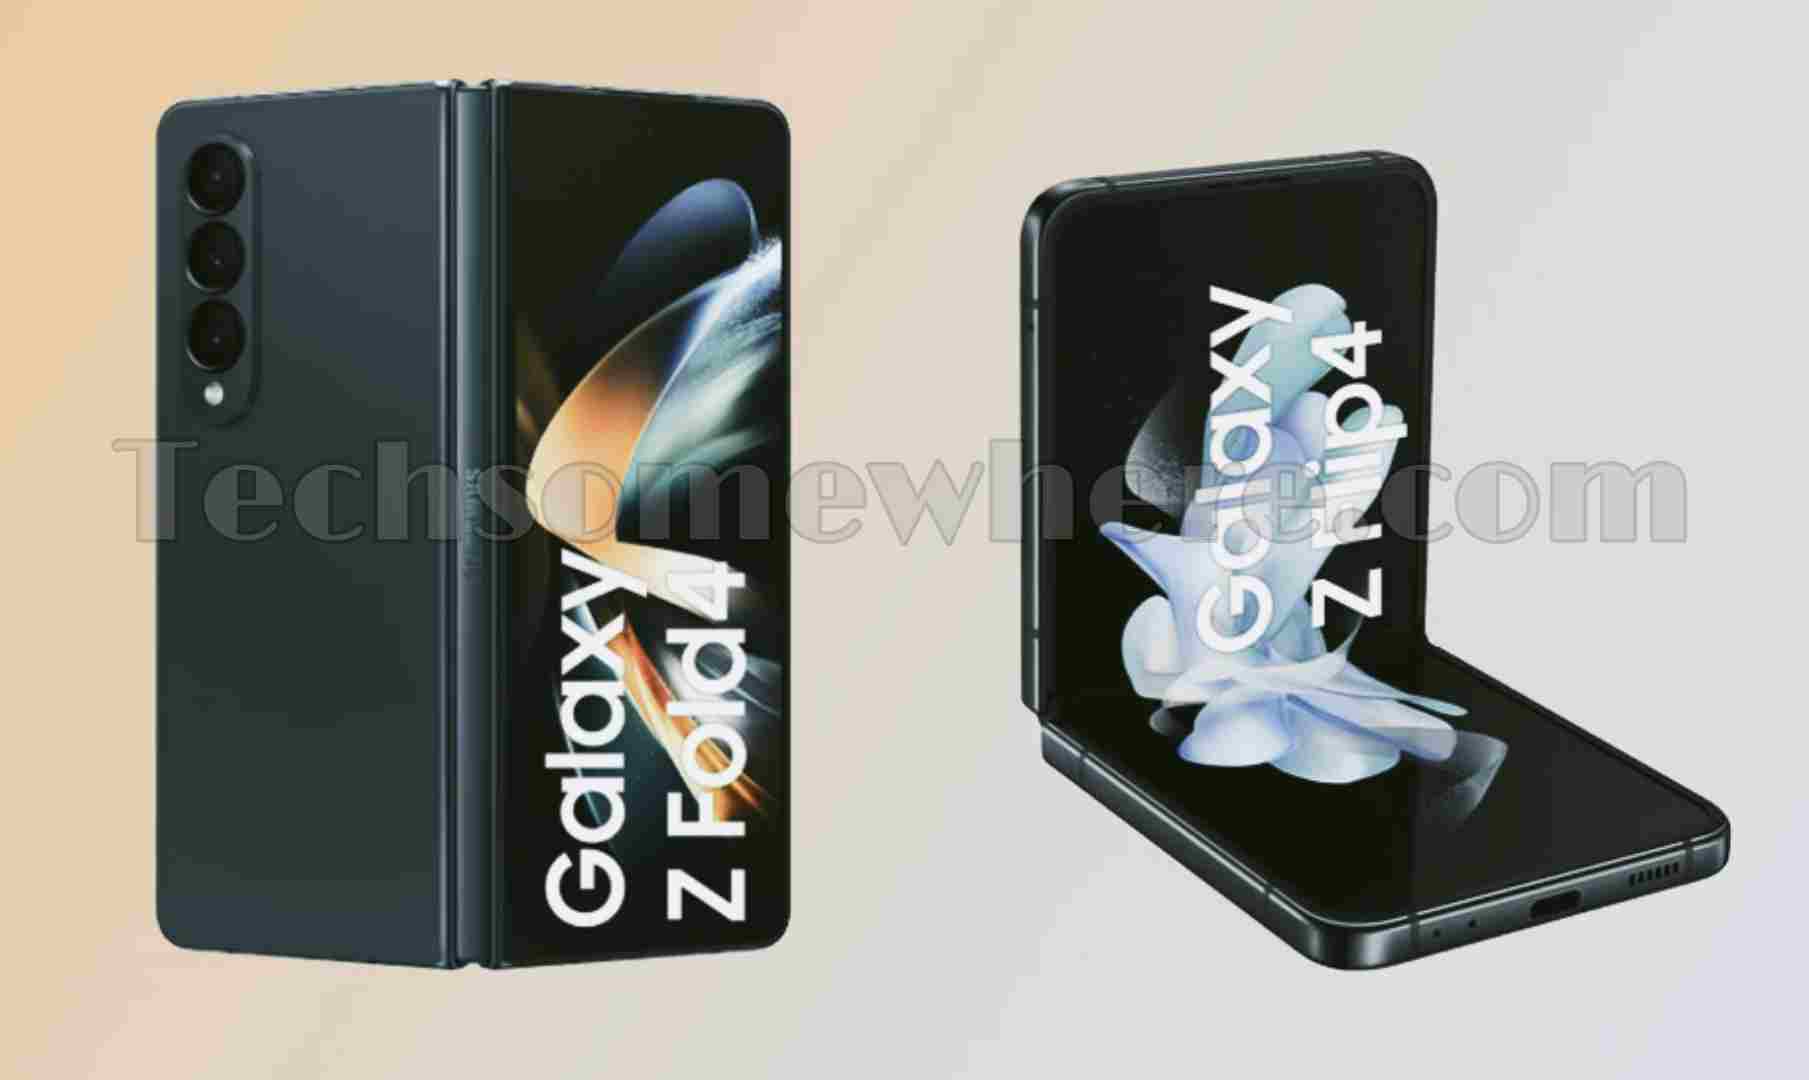 Here We get Some Leaked Rumours And Specs about Samsung Galaxy Z Flip 4 and Galaxy Z Fold 4! Check it out!